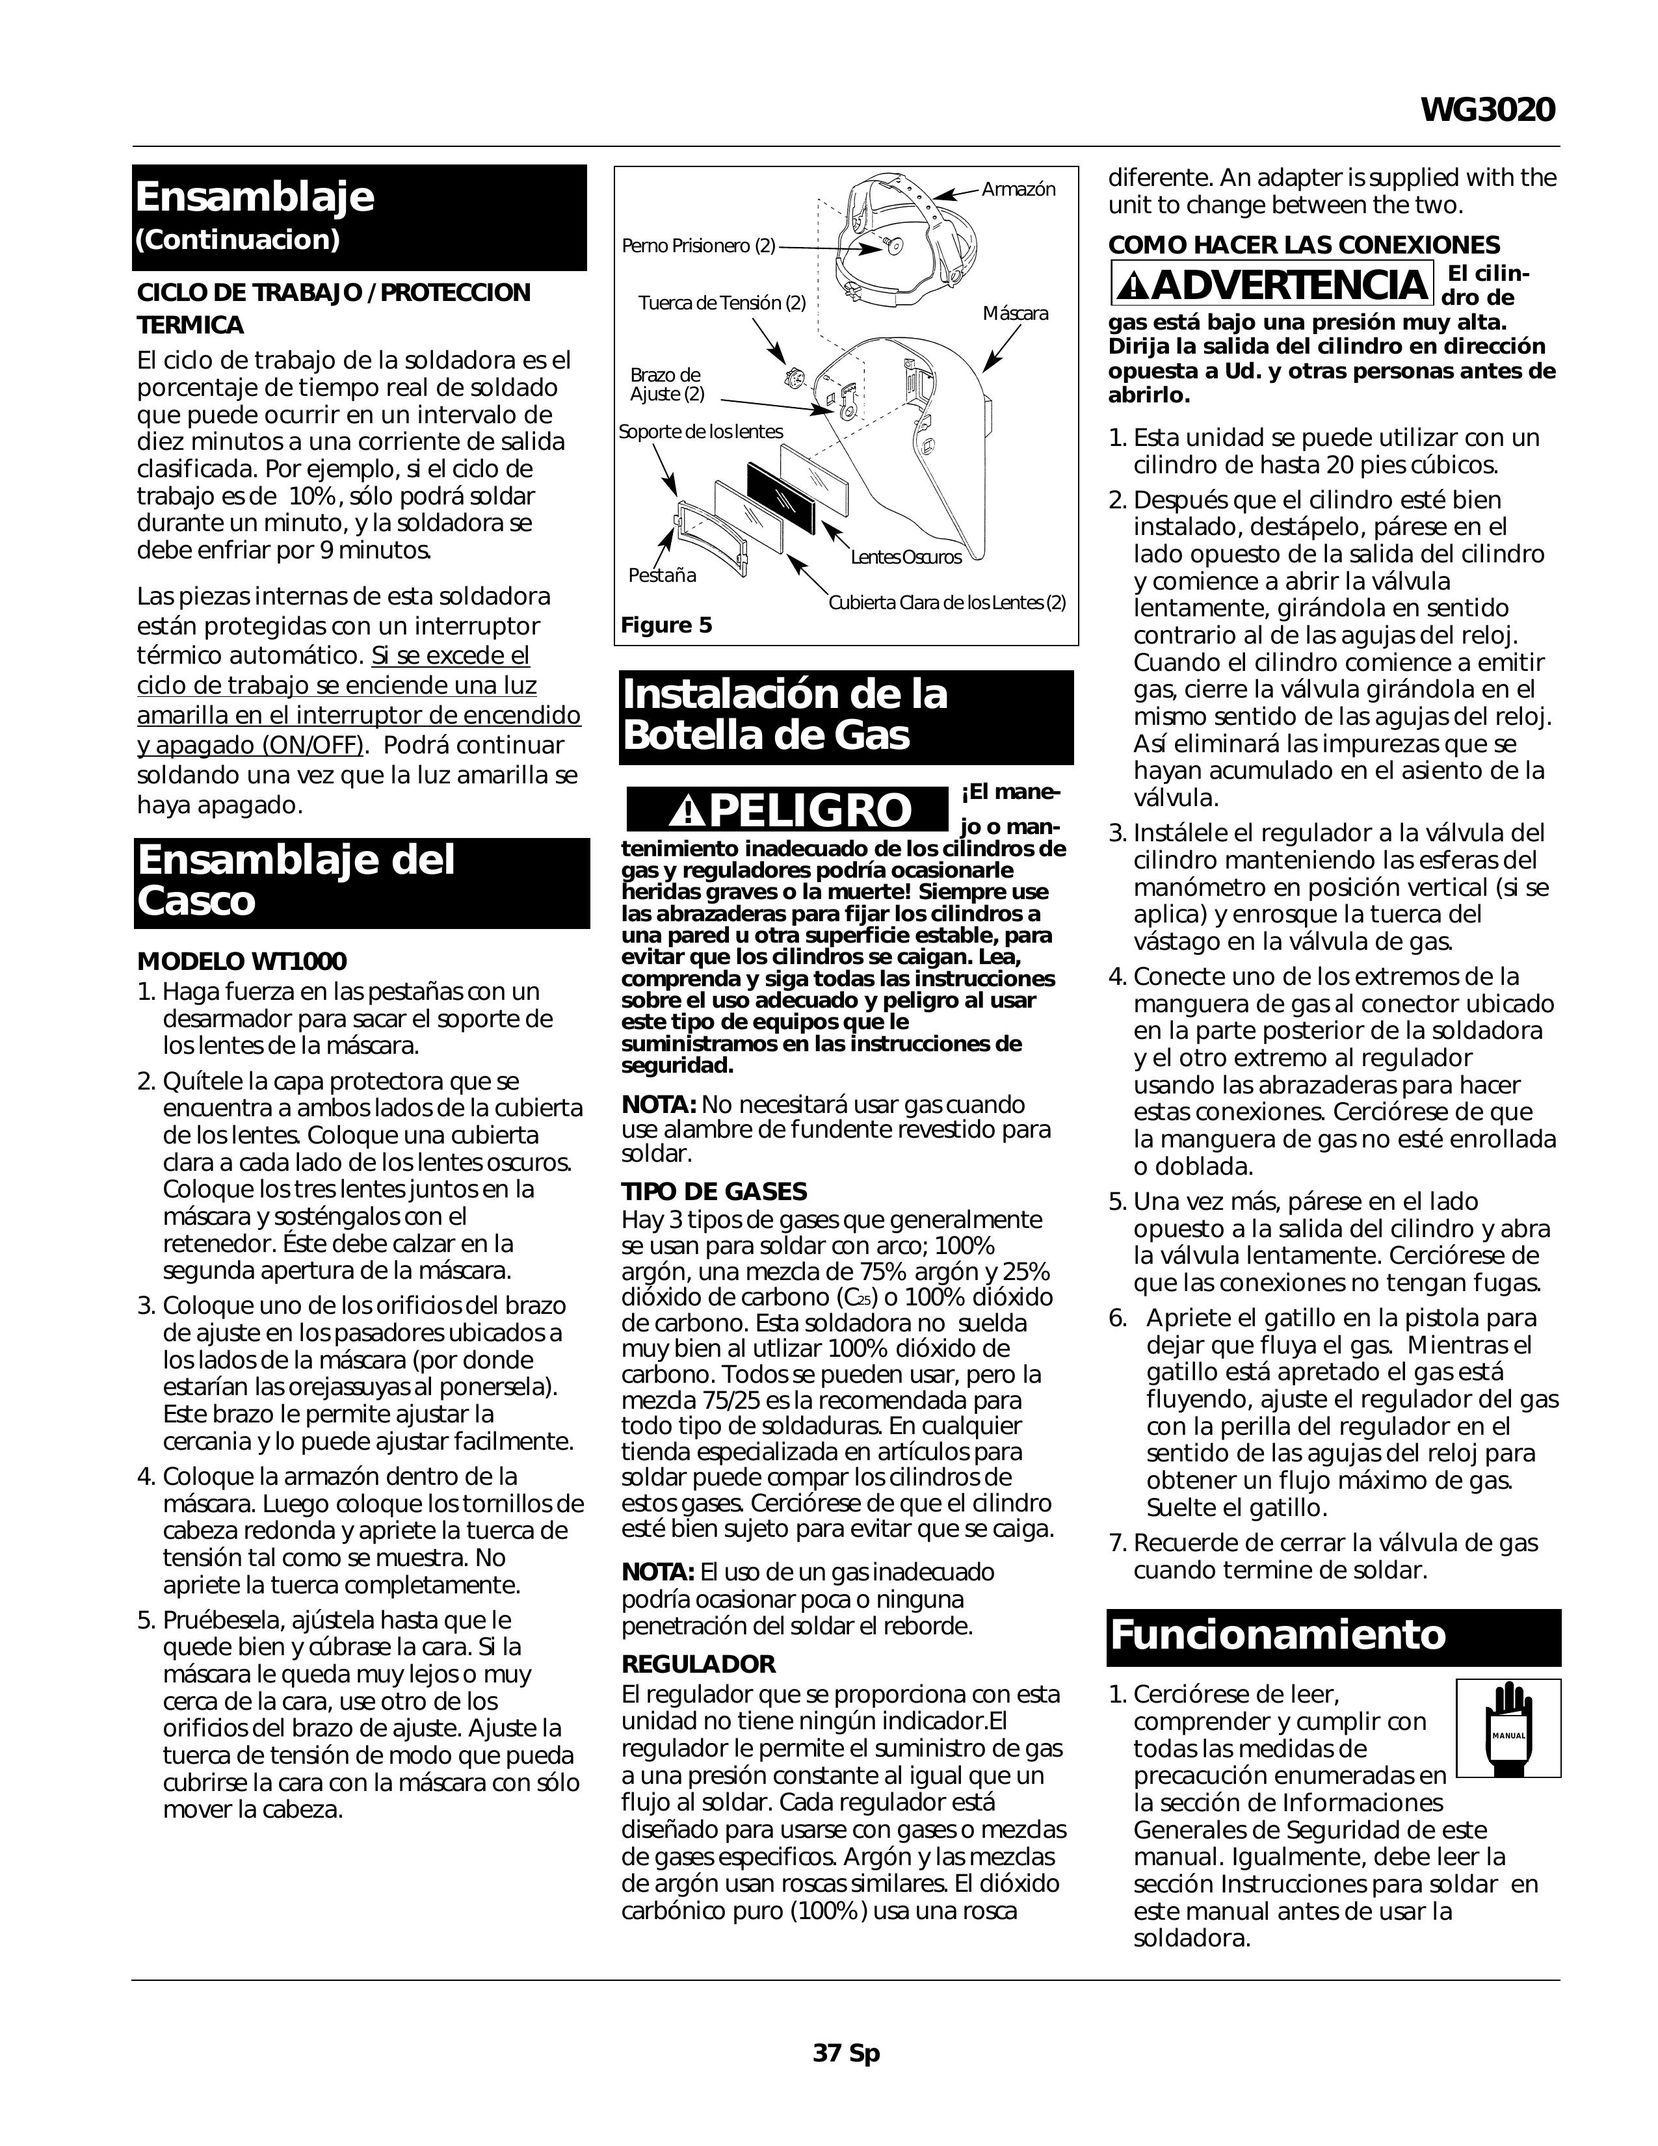 Campbell Hausfeld WG3020 Handheld Game System User Manual (Page 37)